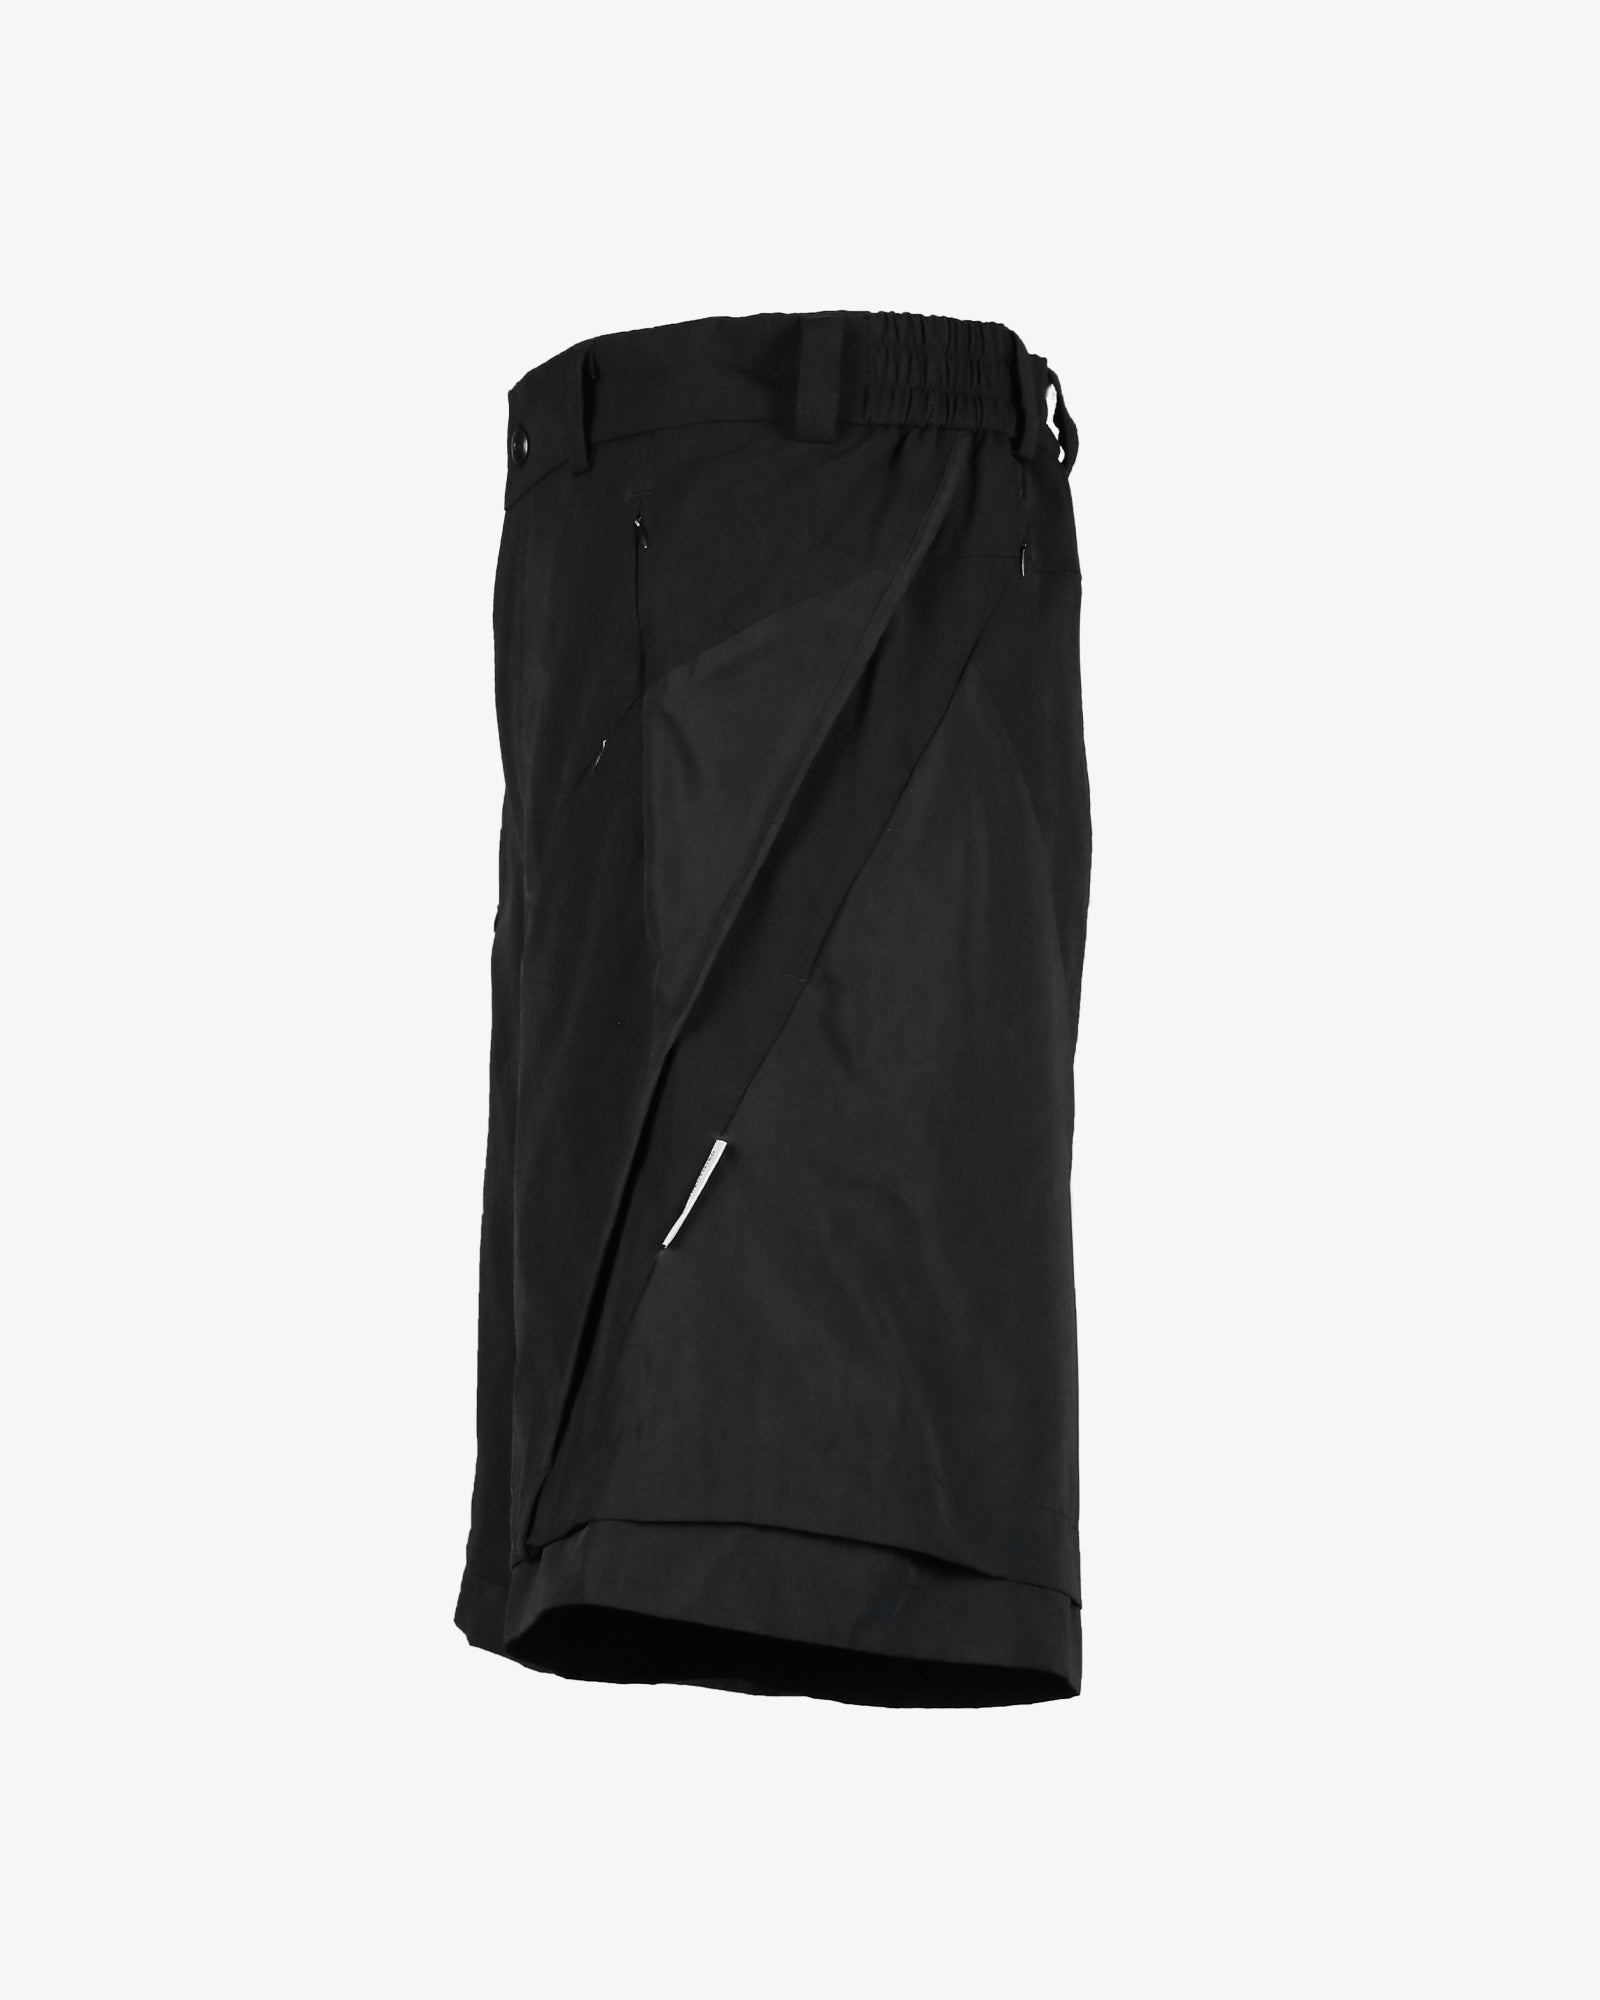 Deconstructed Dual Layered Shorts